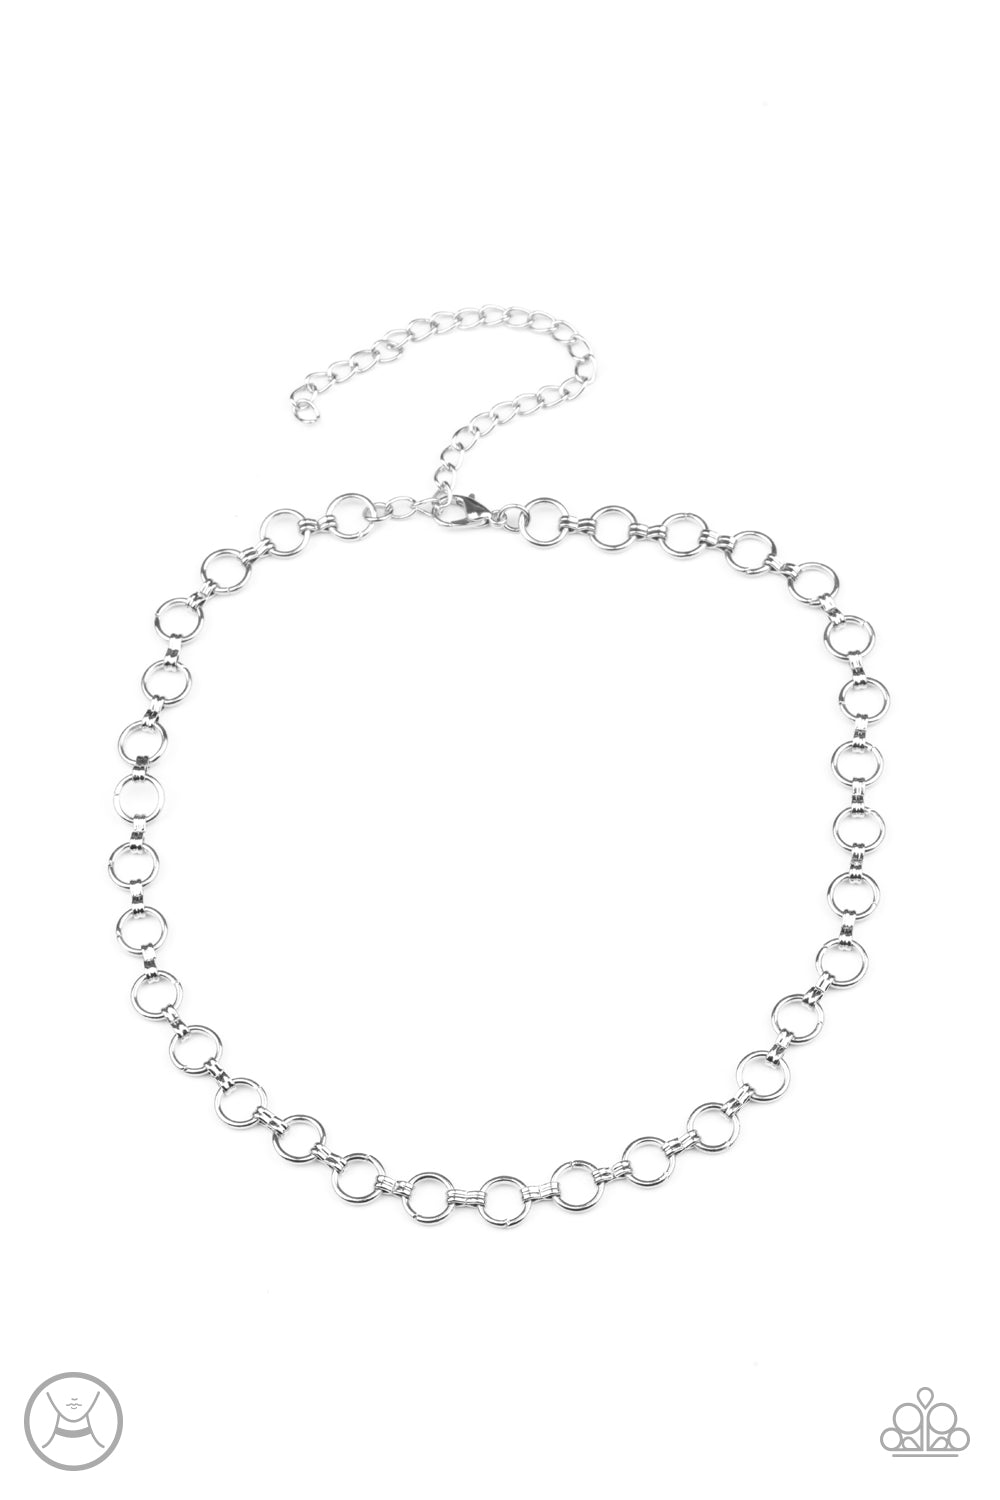 Insta Connection Silver Choker Necklace - Paparazzi Accessories. Attached to dainty fittings, a collection of shiny silver links connect around the neck for a minimalist inspired fashion. Features an adjustable clasp closure.  All Paparazzi Accessories are lead free and nickel free!  Sold as one individual choker necklace. Includes one pair of matching earrings.